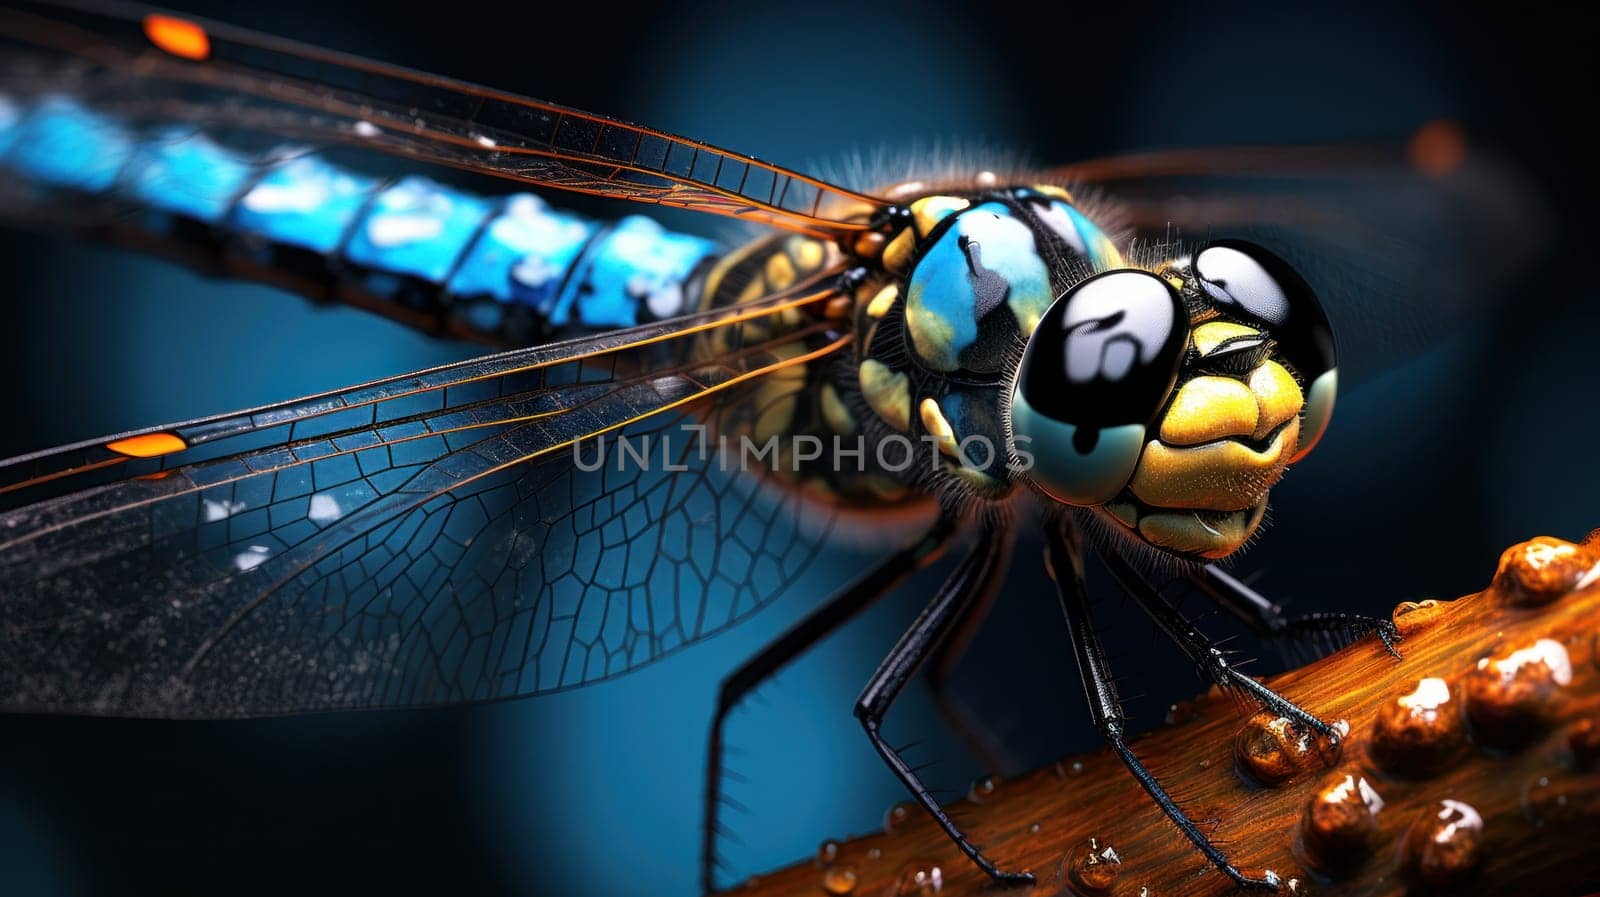 A close up of a dragonfly with blue and yellow eyes, AI by starush